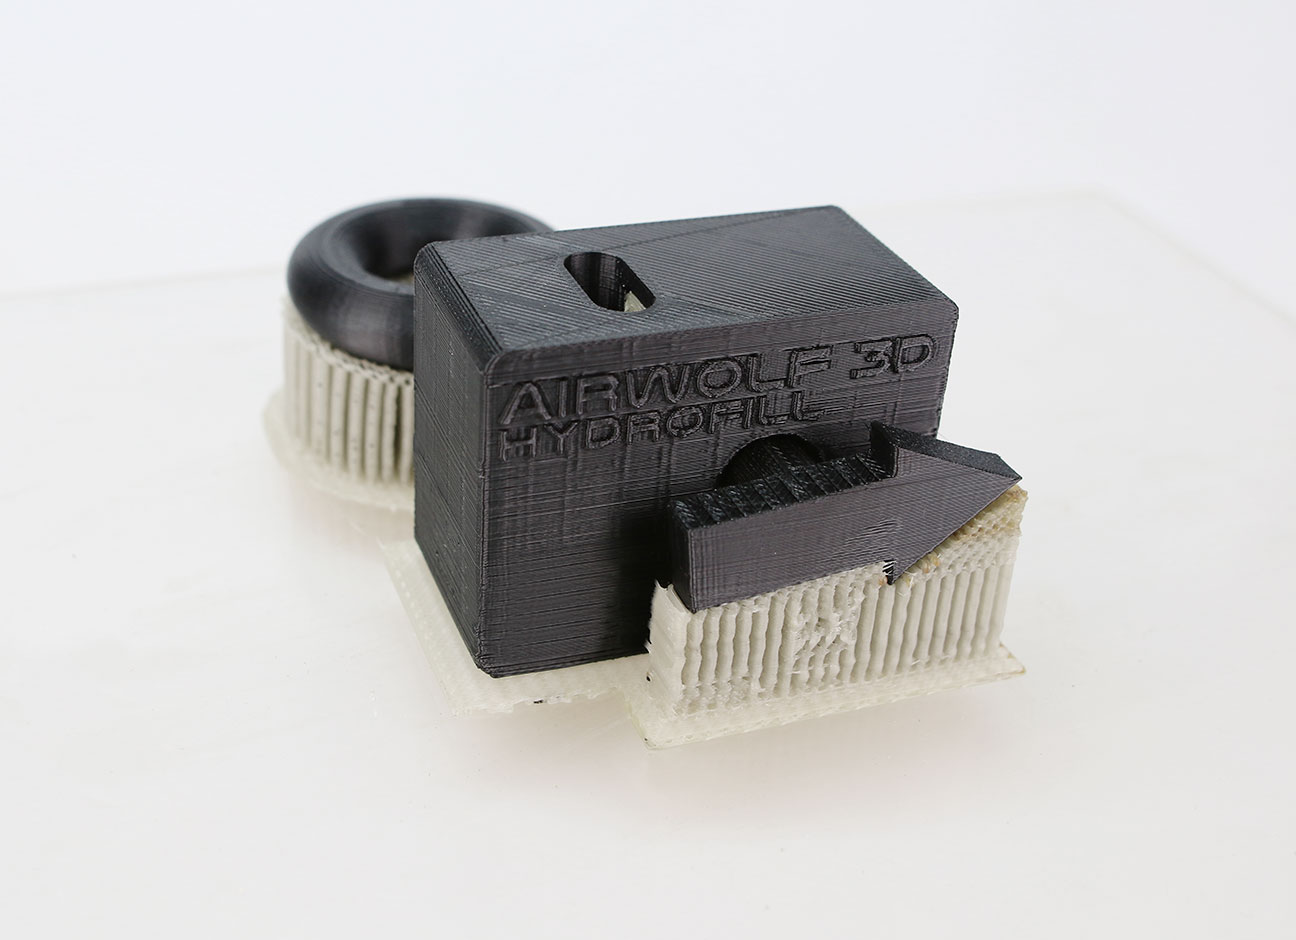 Impossible to 3D print without soluble support, the Airwolf 3D HydroFill Gearbox features elements that rotate thanks to fully operational gears enclosed within the box.